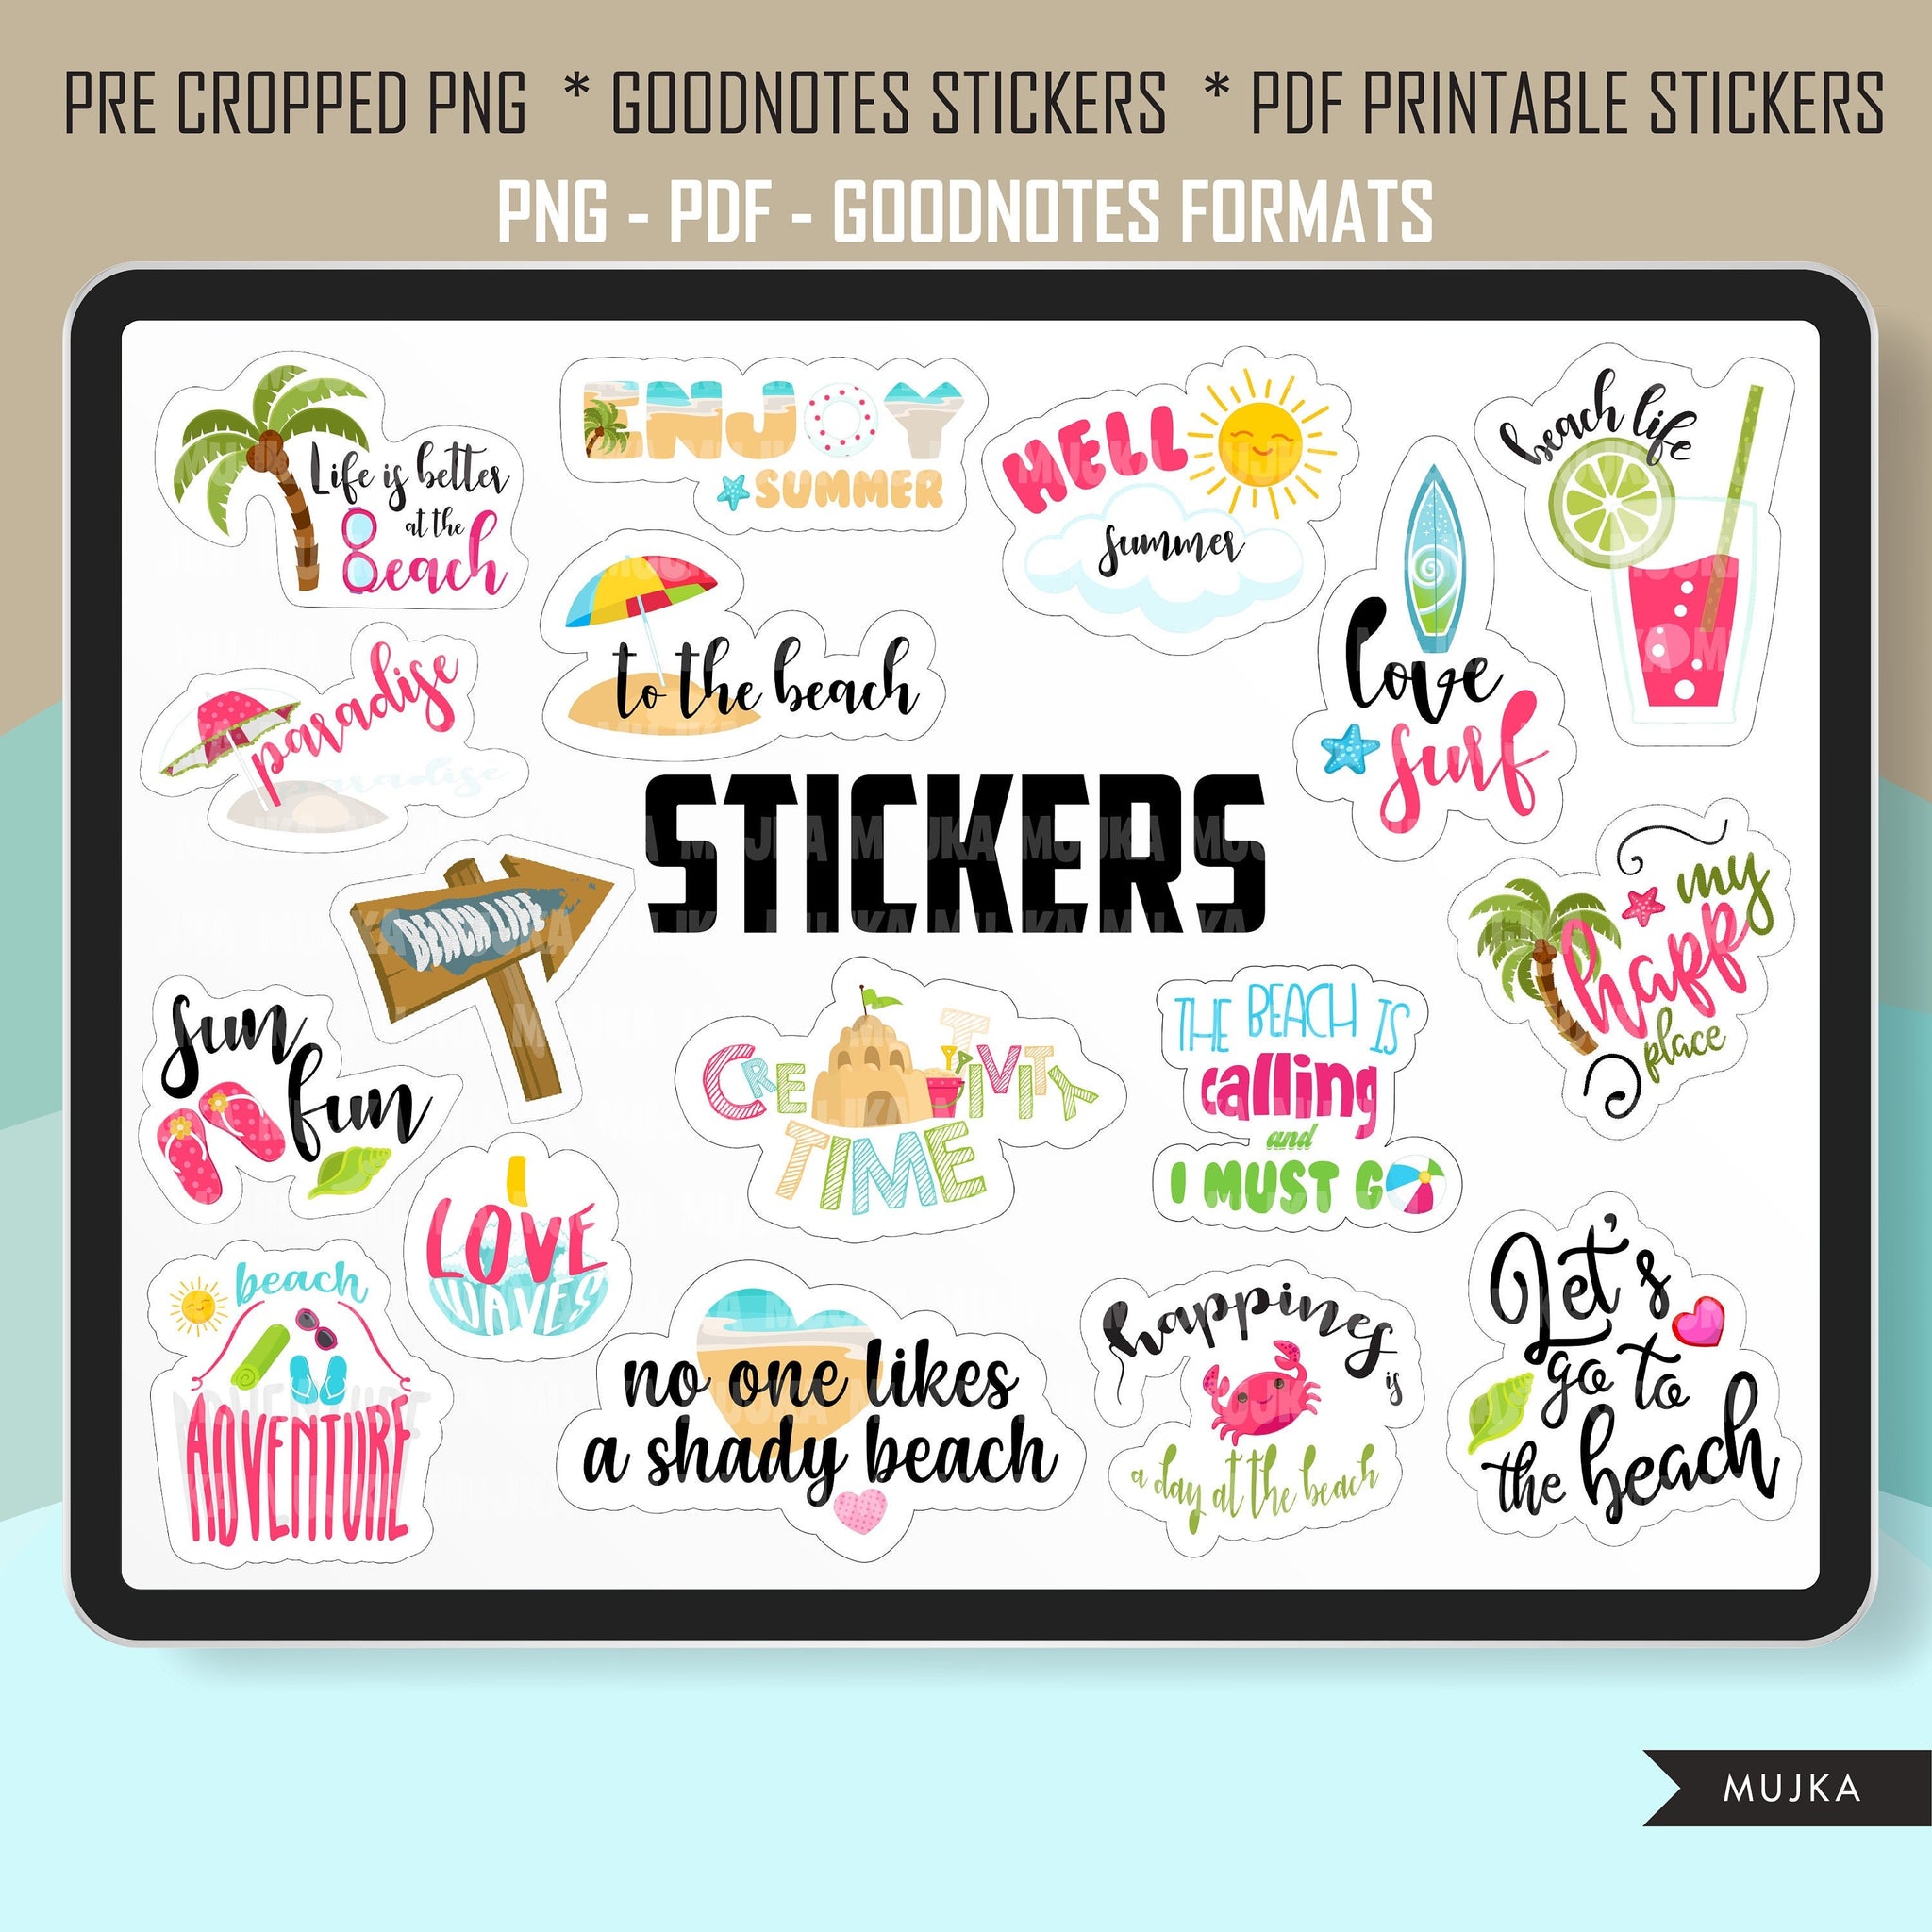 Holiday 2 Digital planner stickers for GoodNotes, PNG holiday stickers